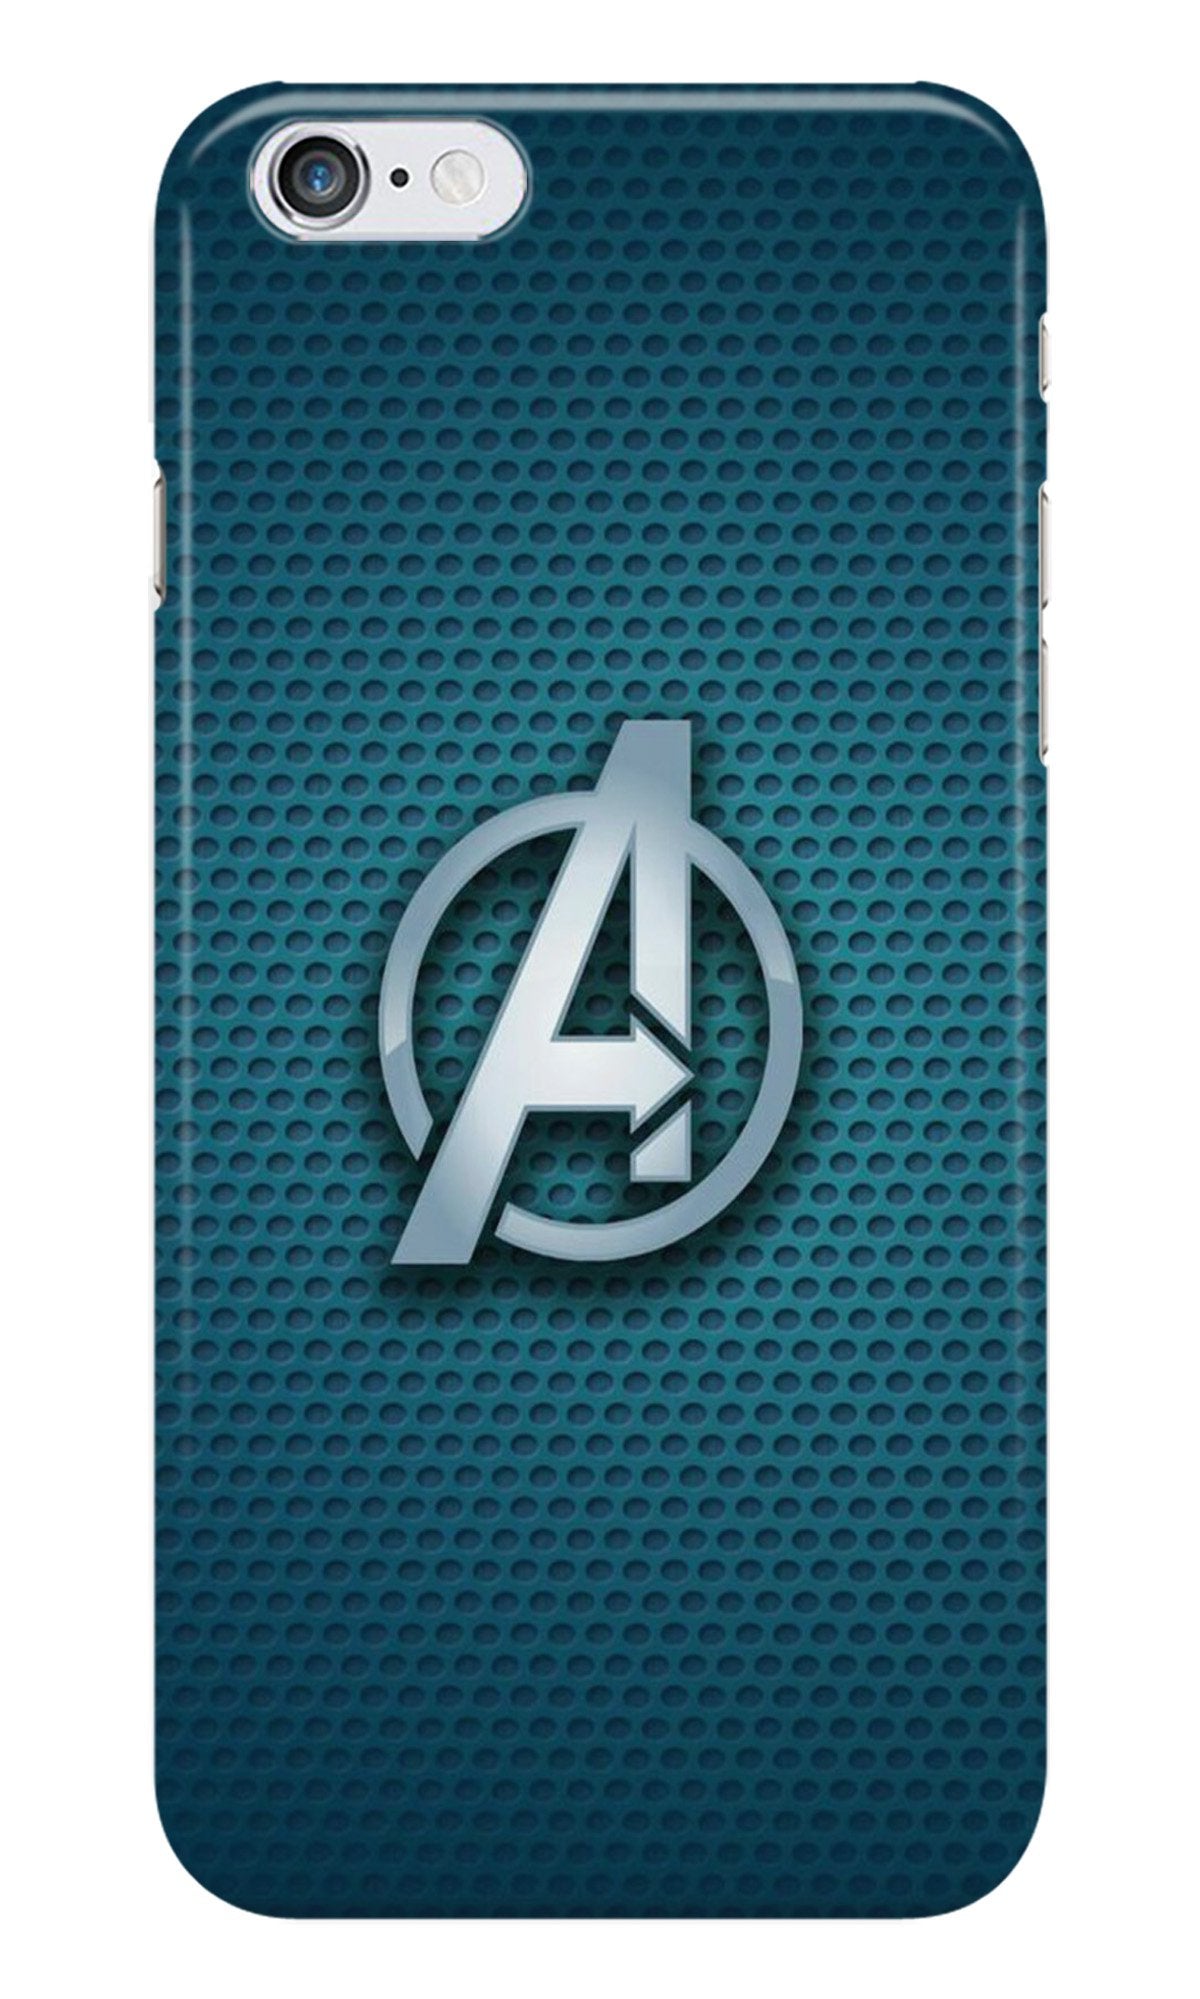 Avengers Case for Iphone 6/6S (Design No. 246)